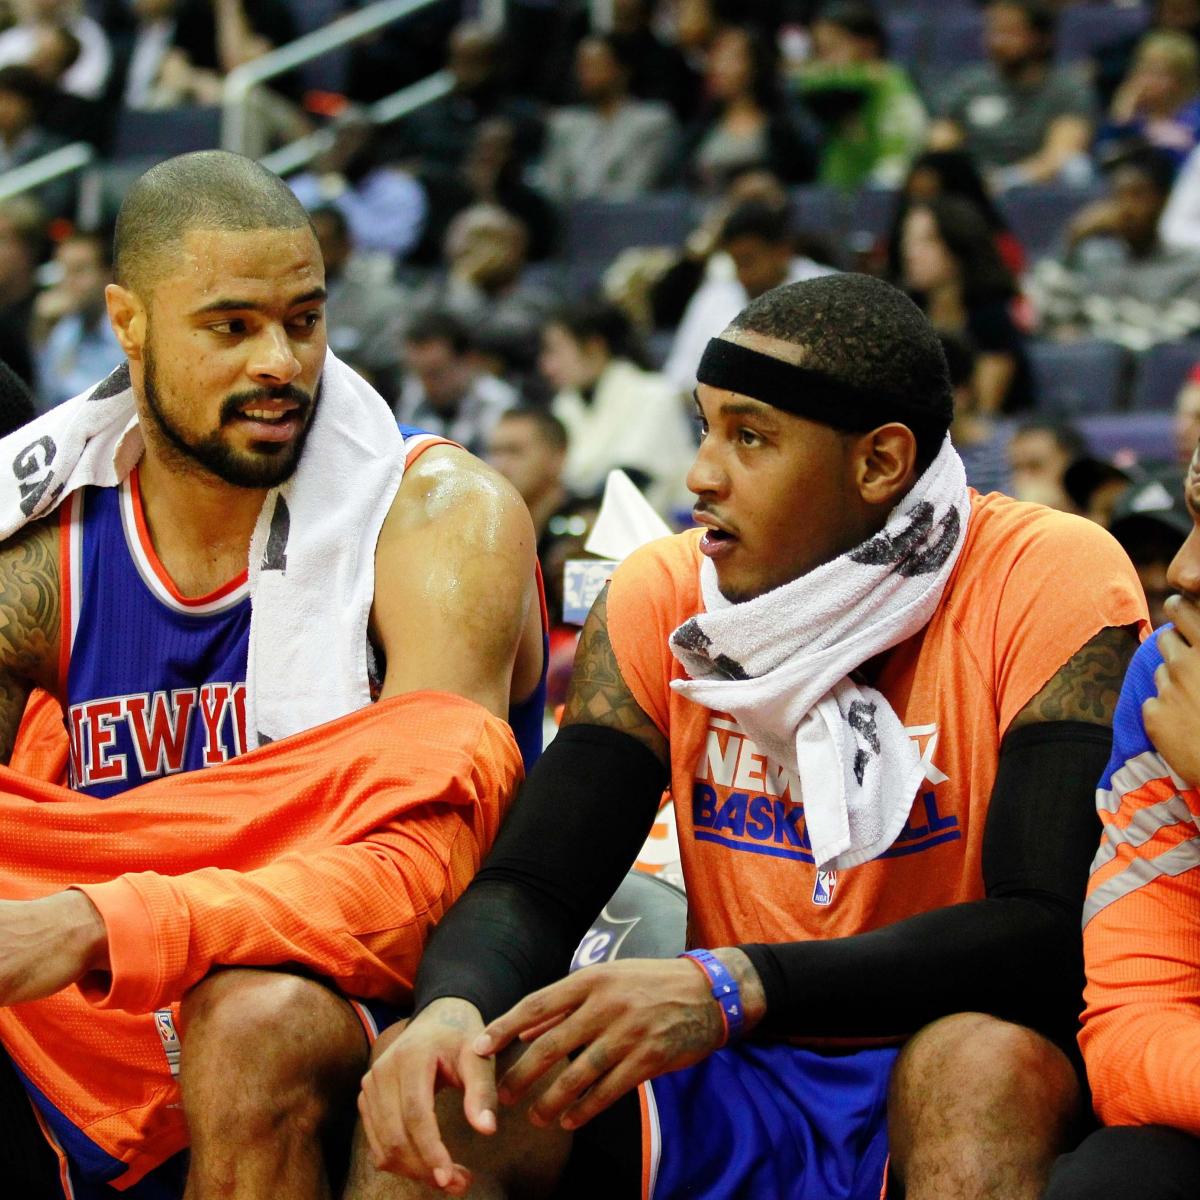 Are the New York Knicks Suffering Growing Pains or Showing Their True